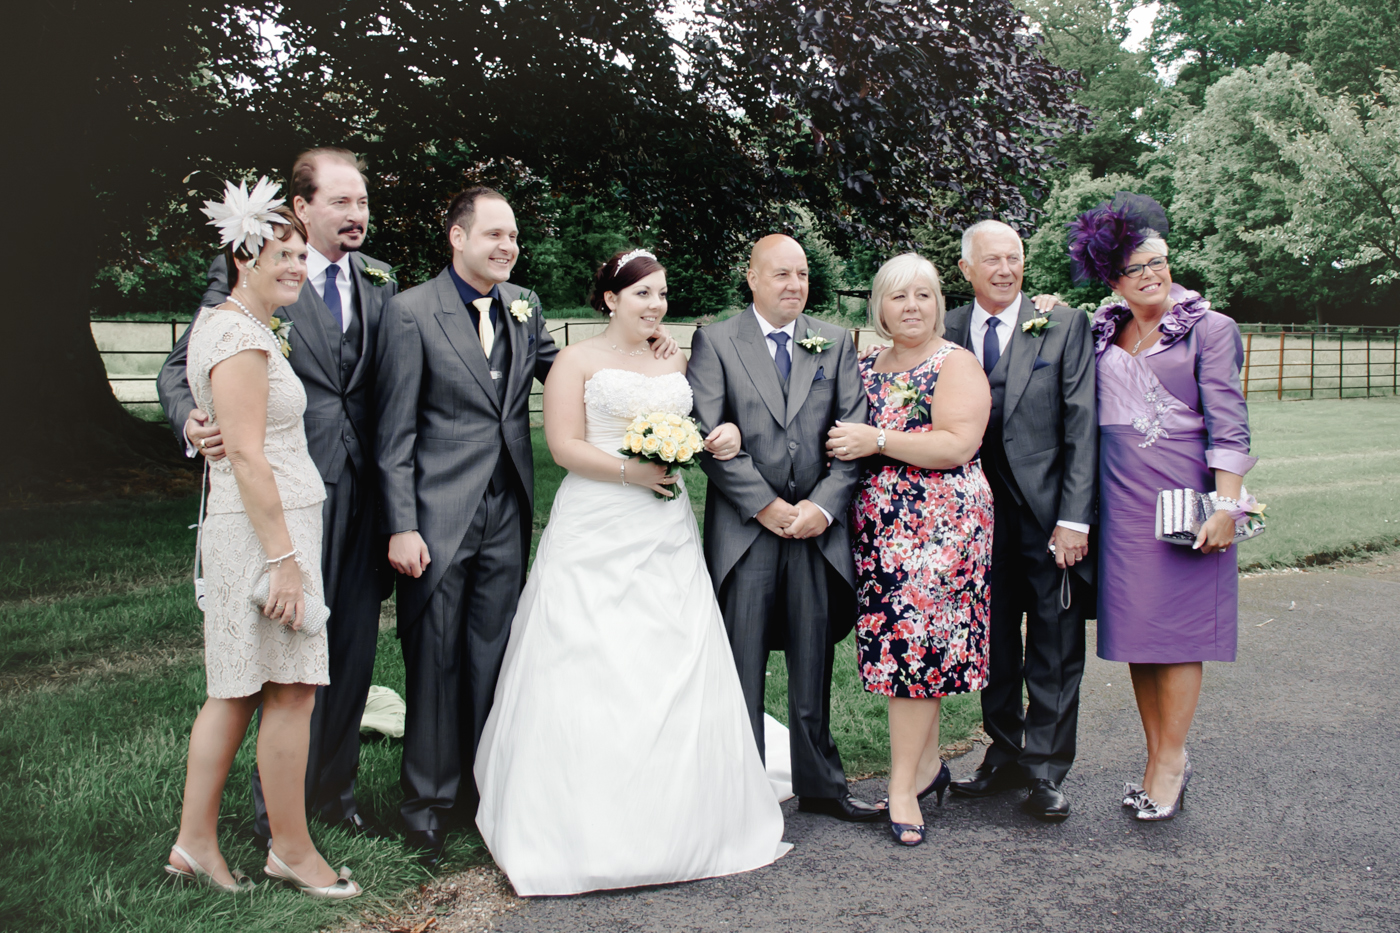 354 - Chris and Natalies Wedding (MAIN) - DO NOT SHARE THIS IMAGES ONLINE -4583.JPG